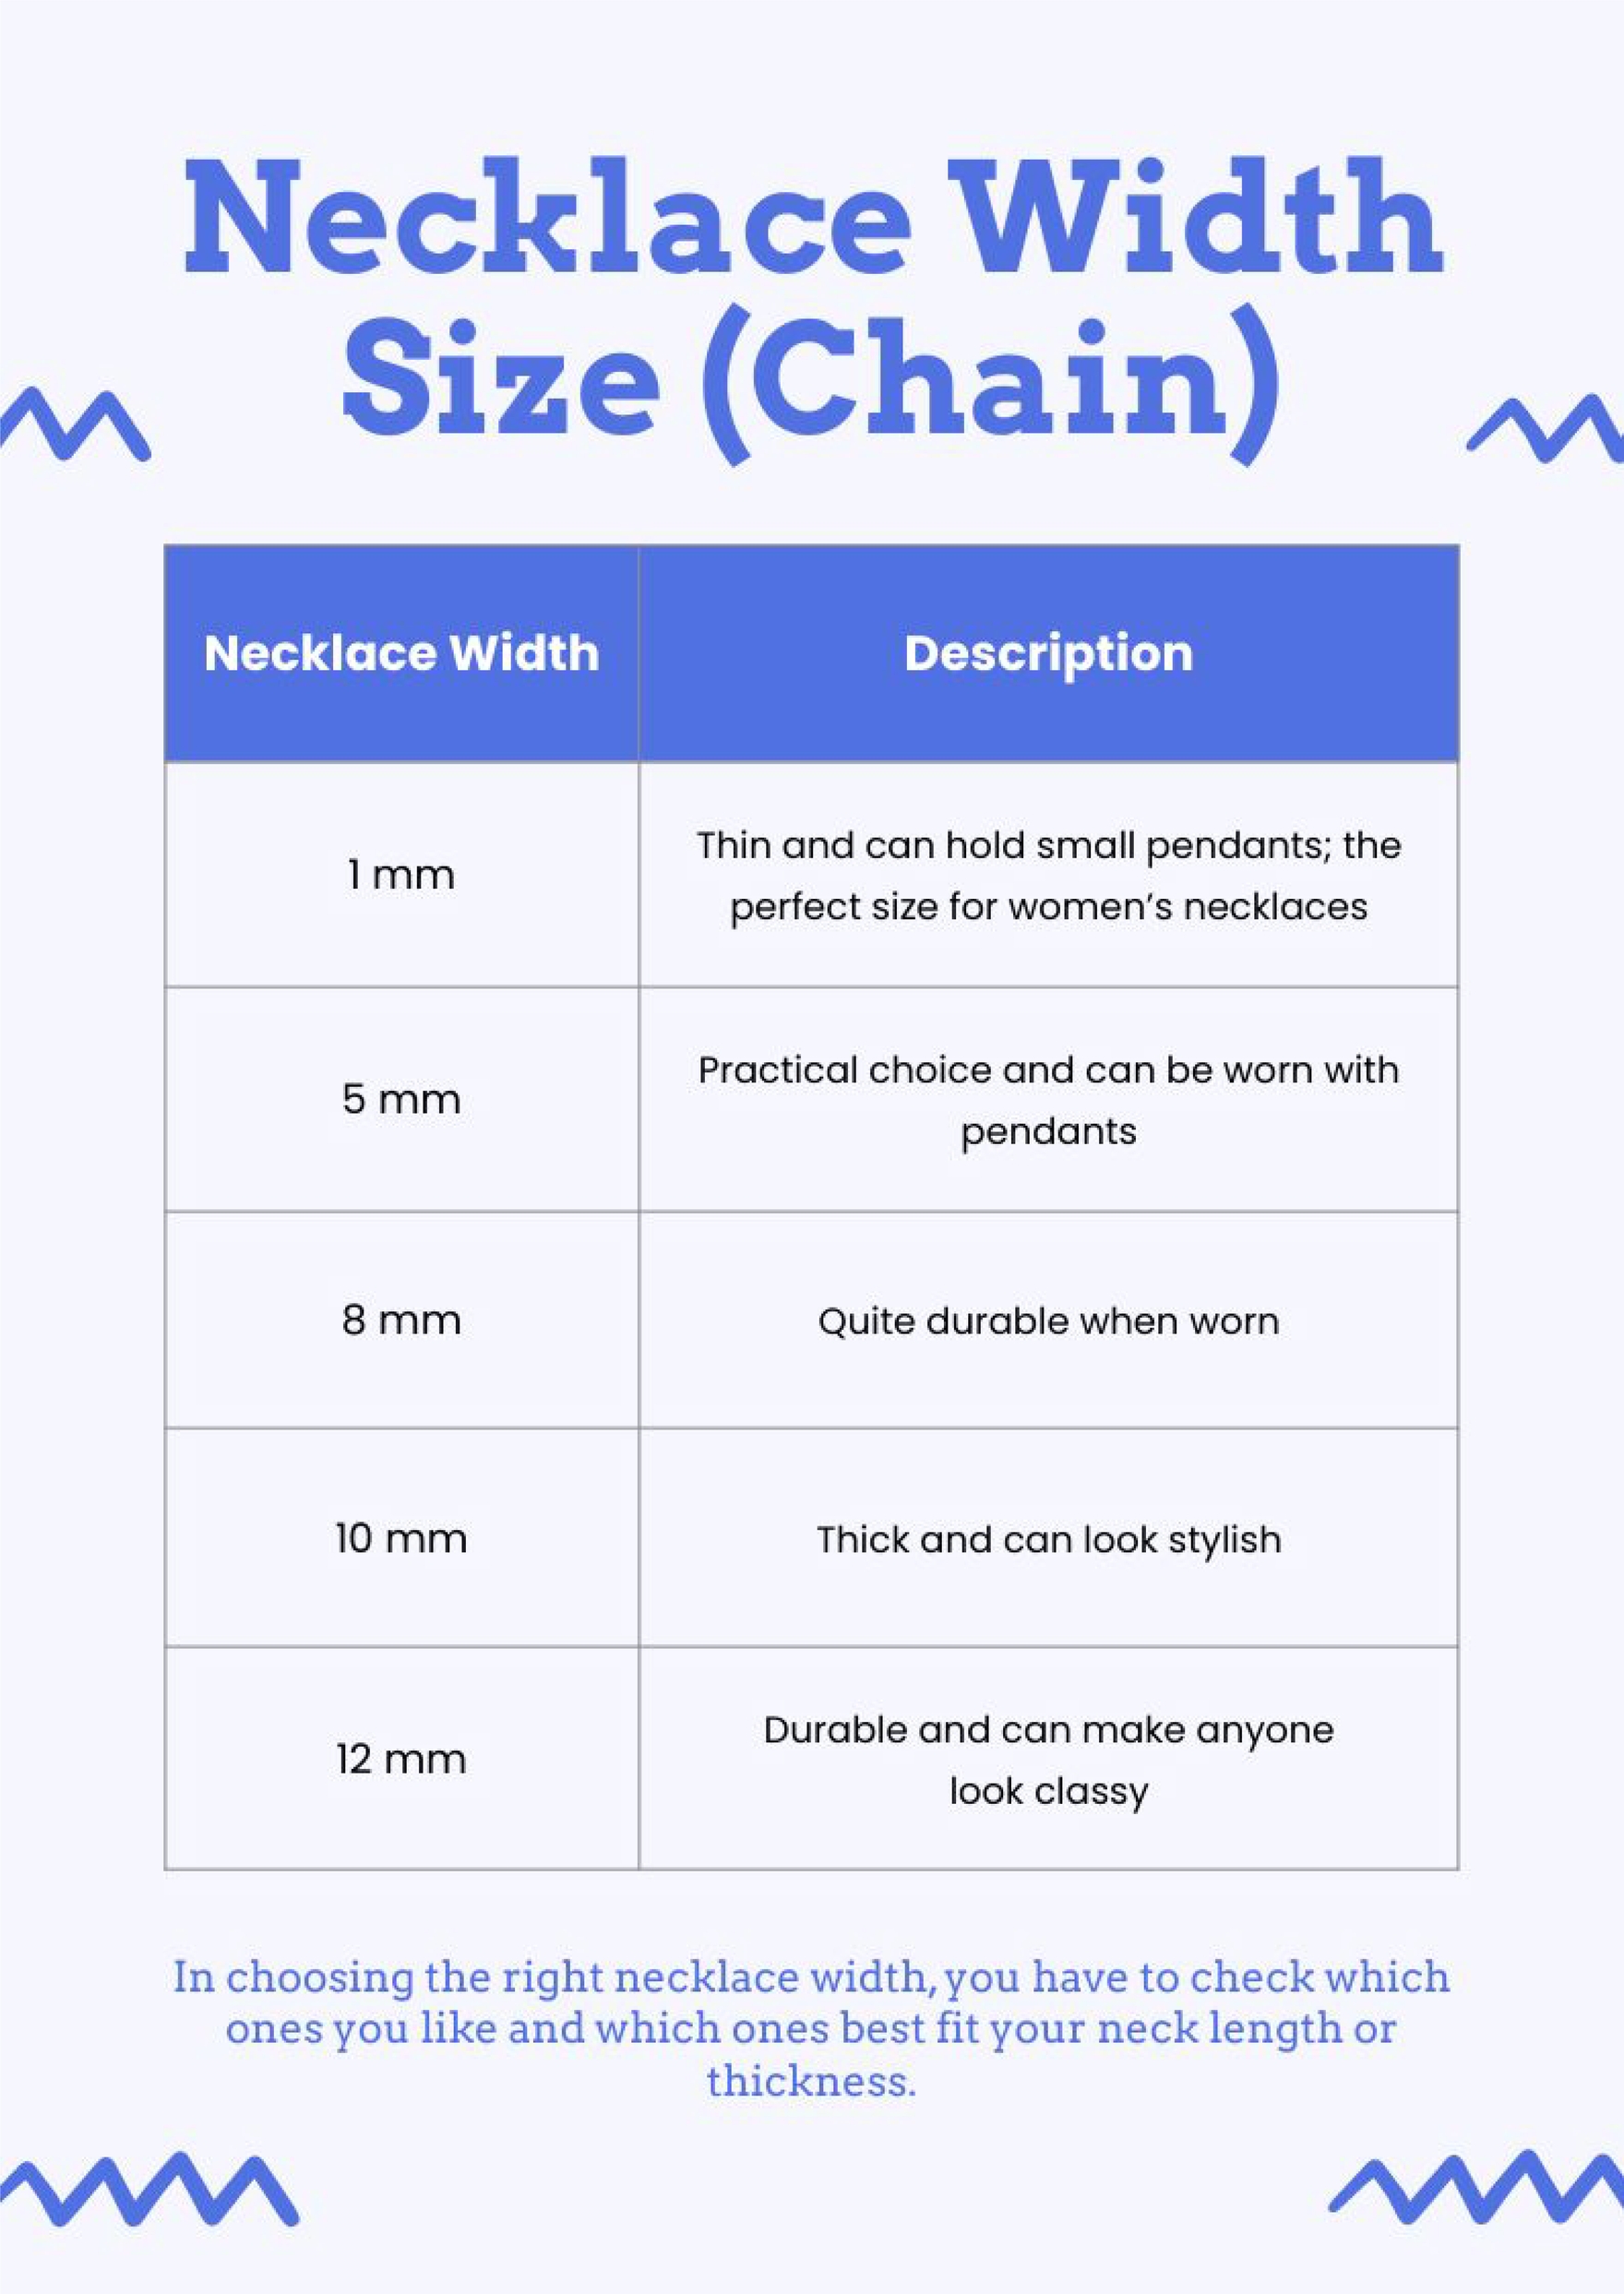 Free Necklace Width Size Chart in PDF, Illustrator